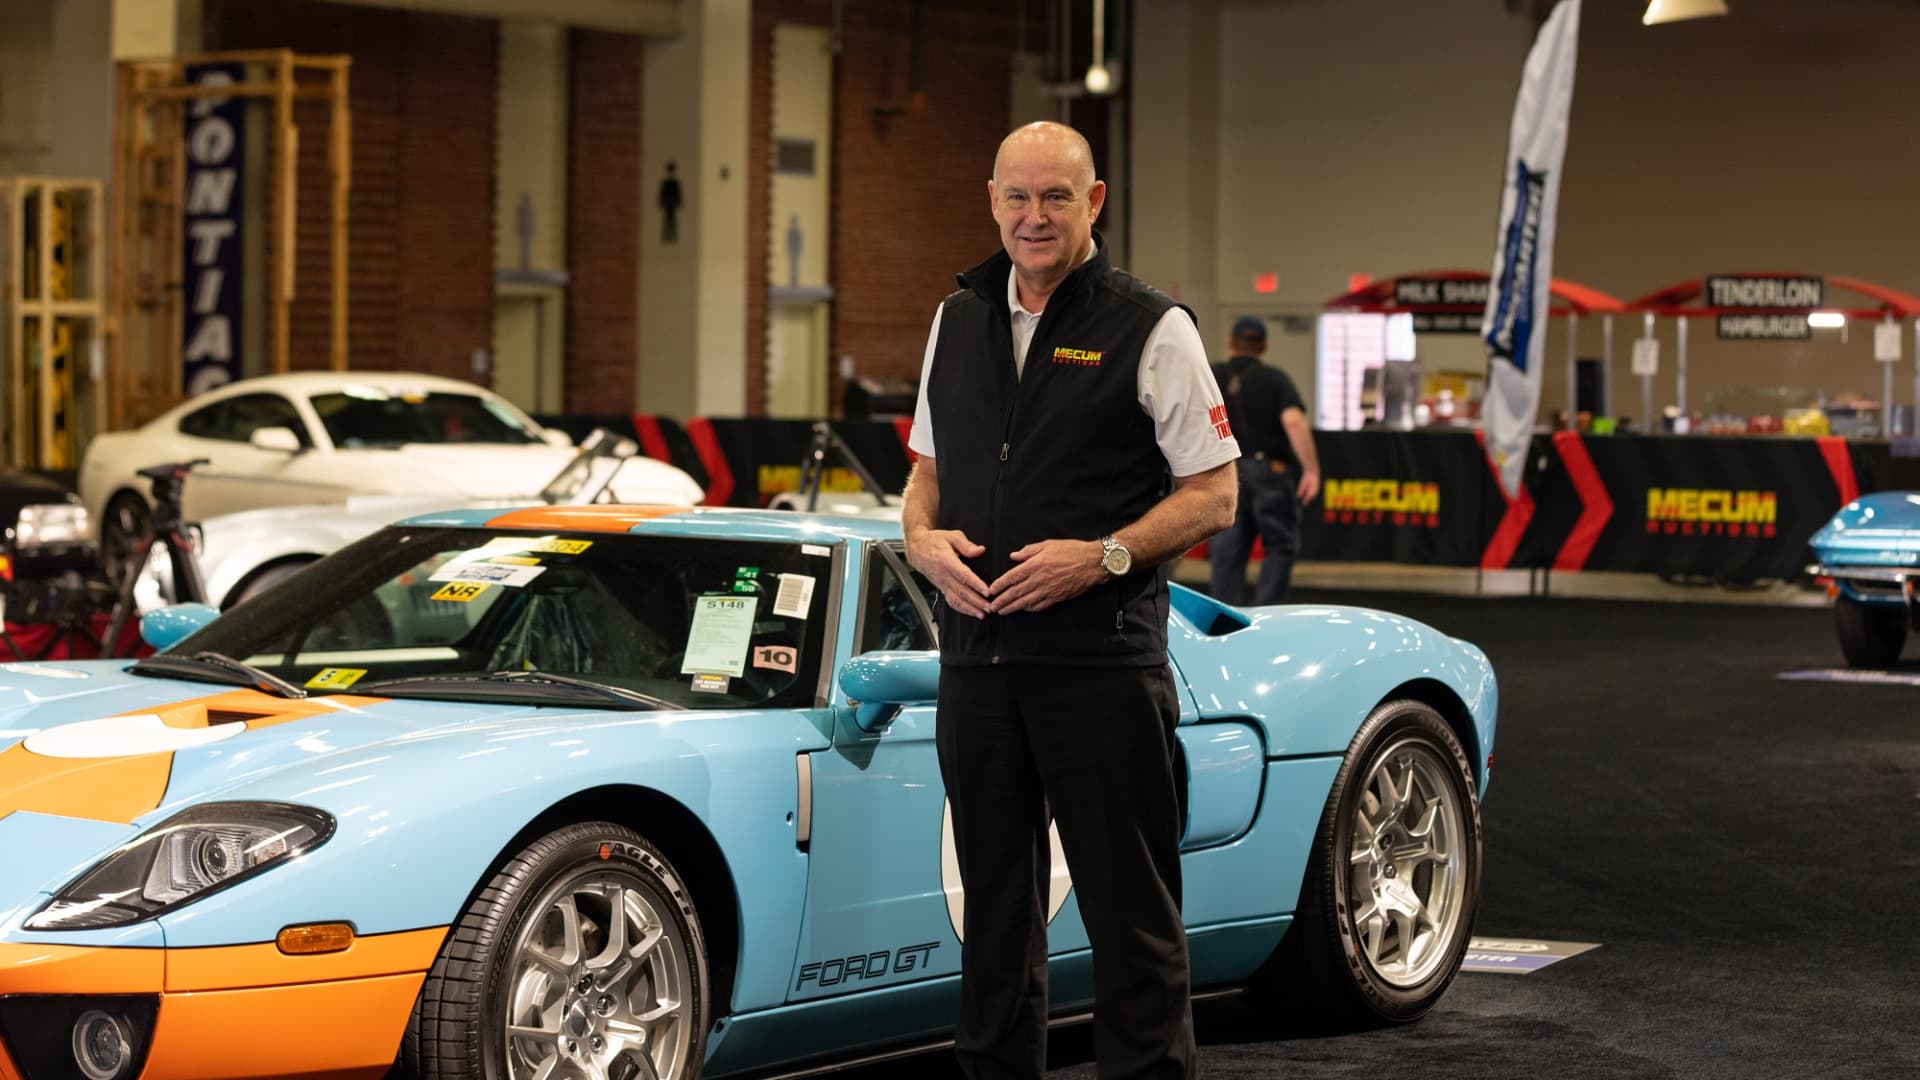 Classic car house Mecum Auctions embraced the Internet and set record sales